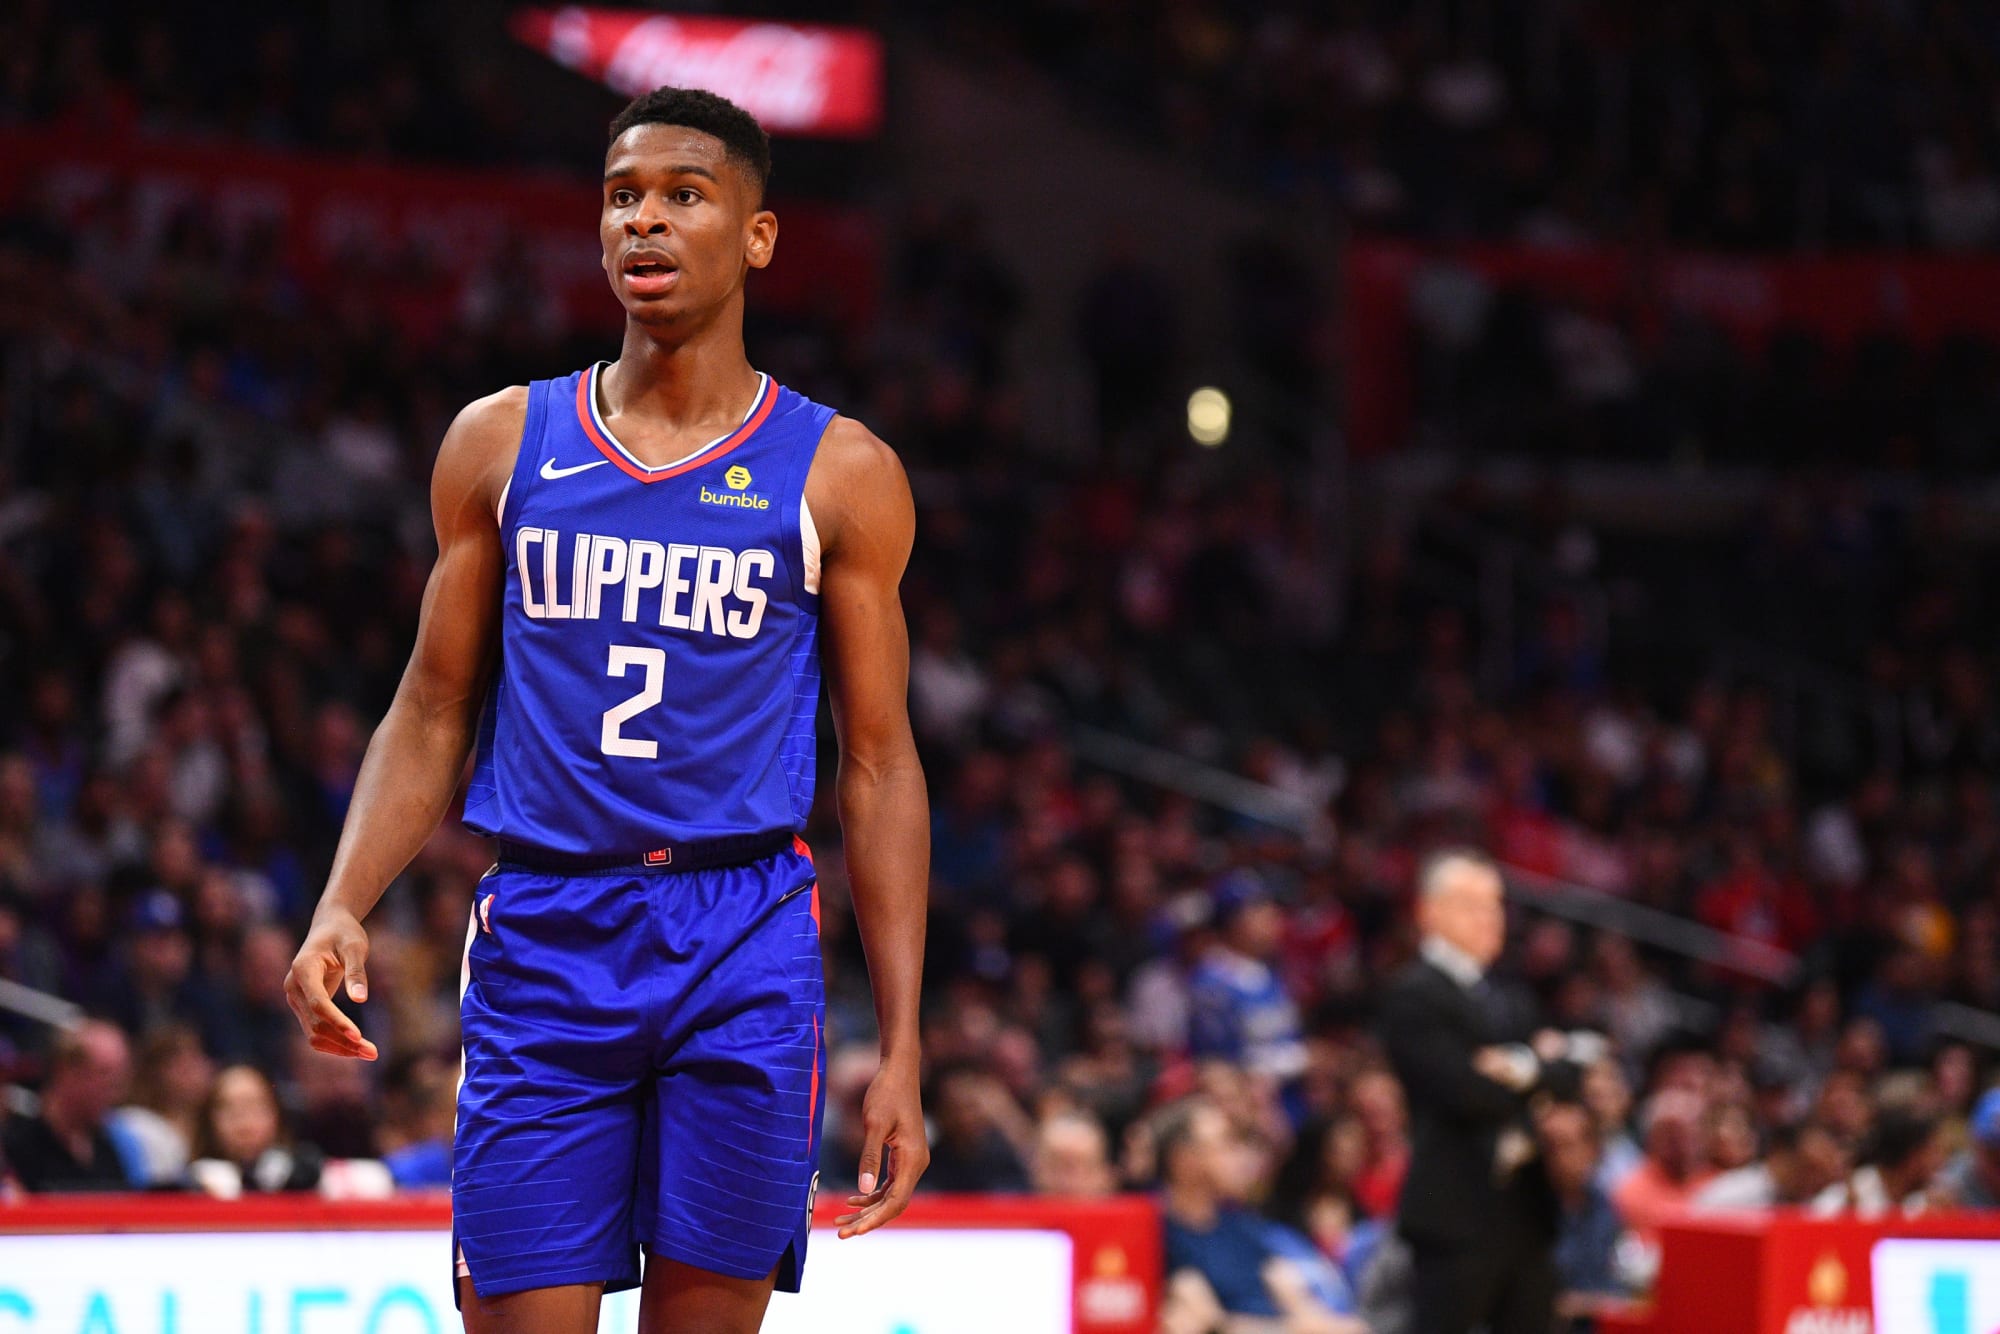 Shai Gilgeous-Alexander has been balling and is averaging more PPG